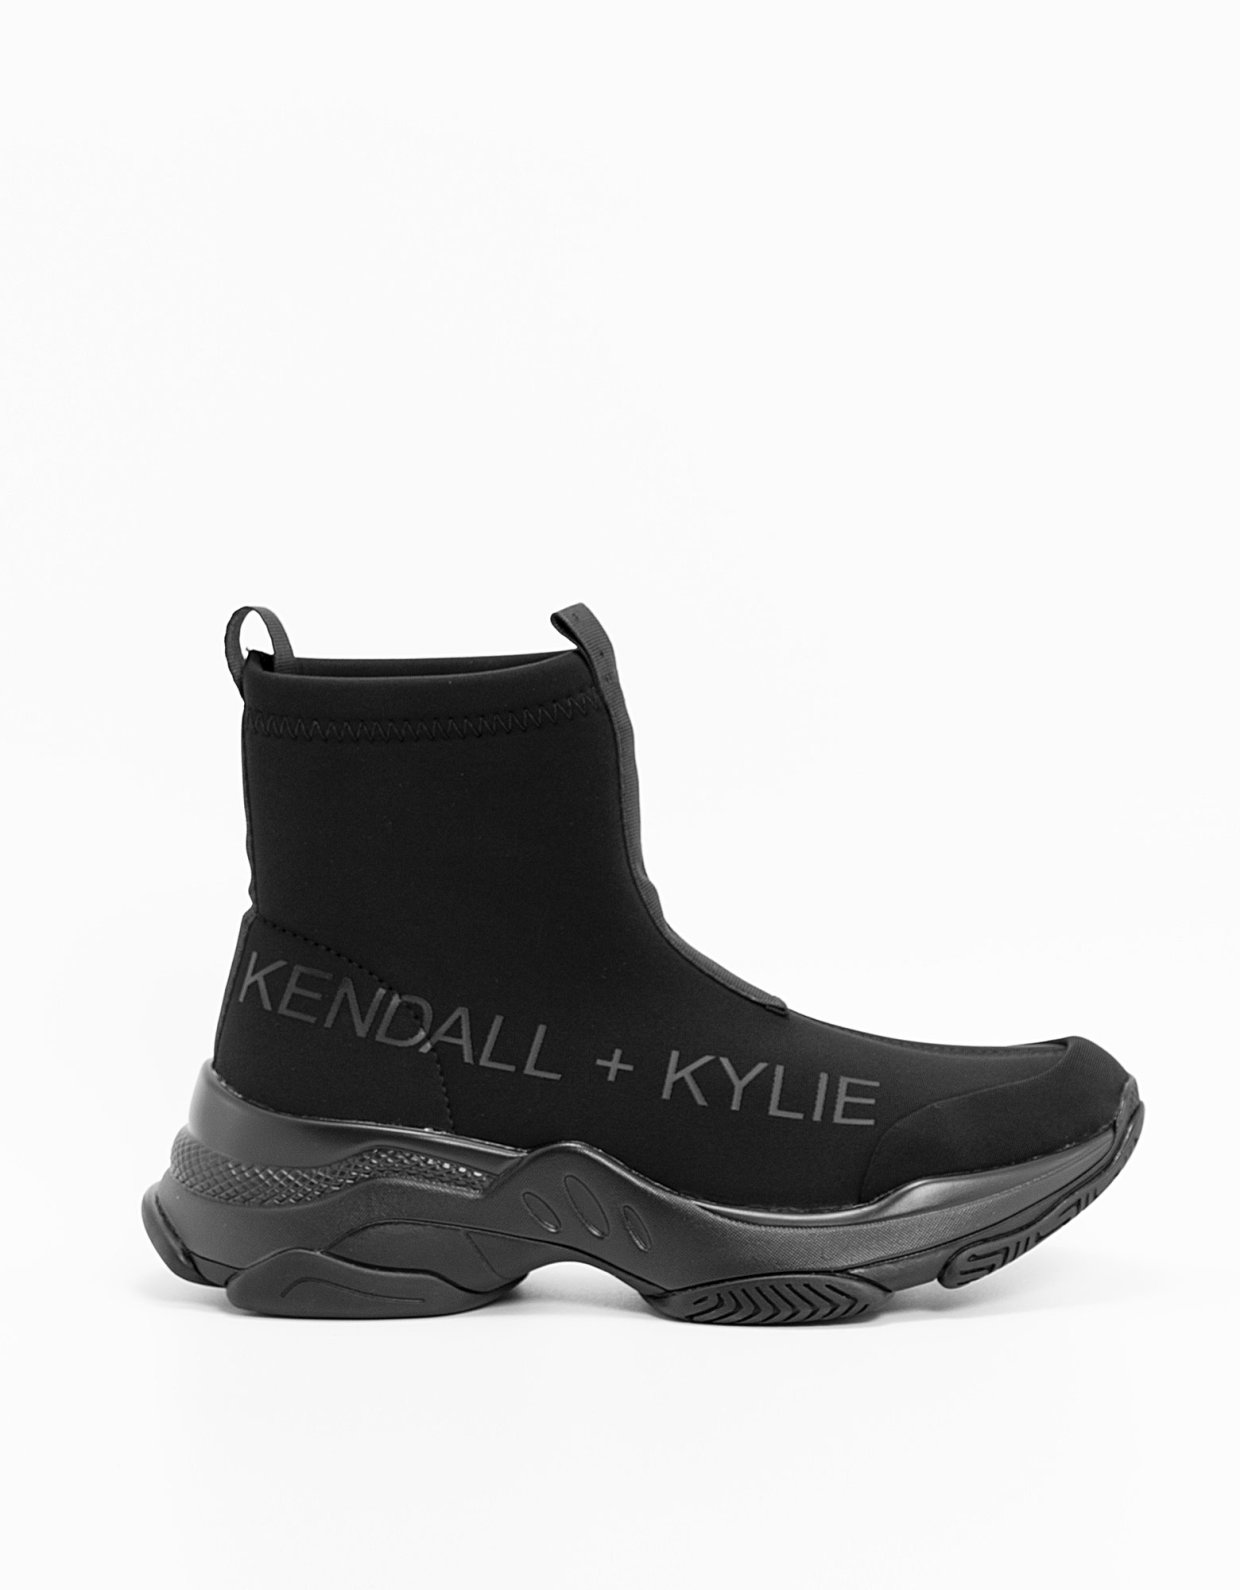 Kendall + Kylie Garin shoes black